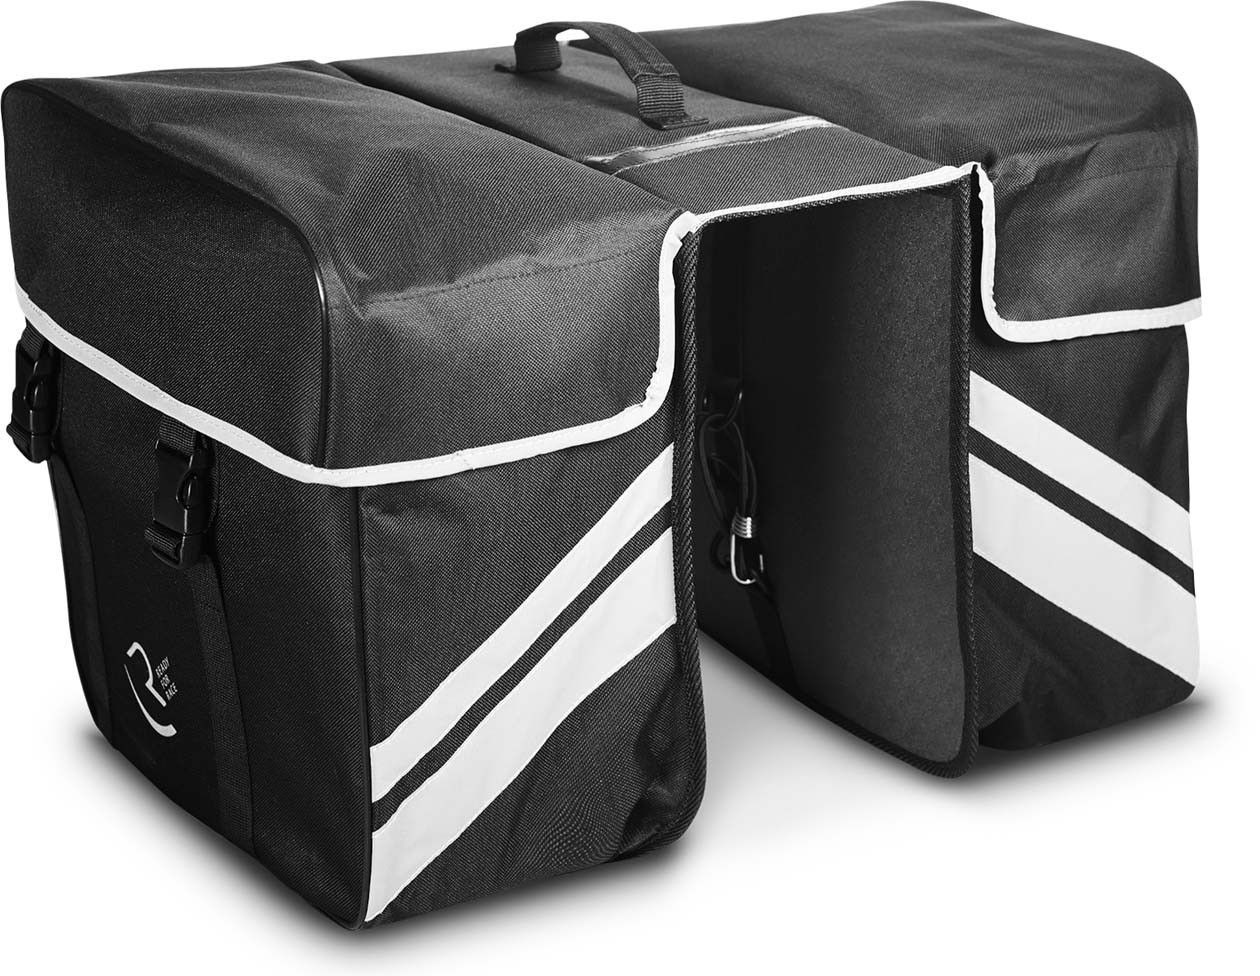 RFR Luggage bags Double black